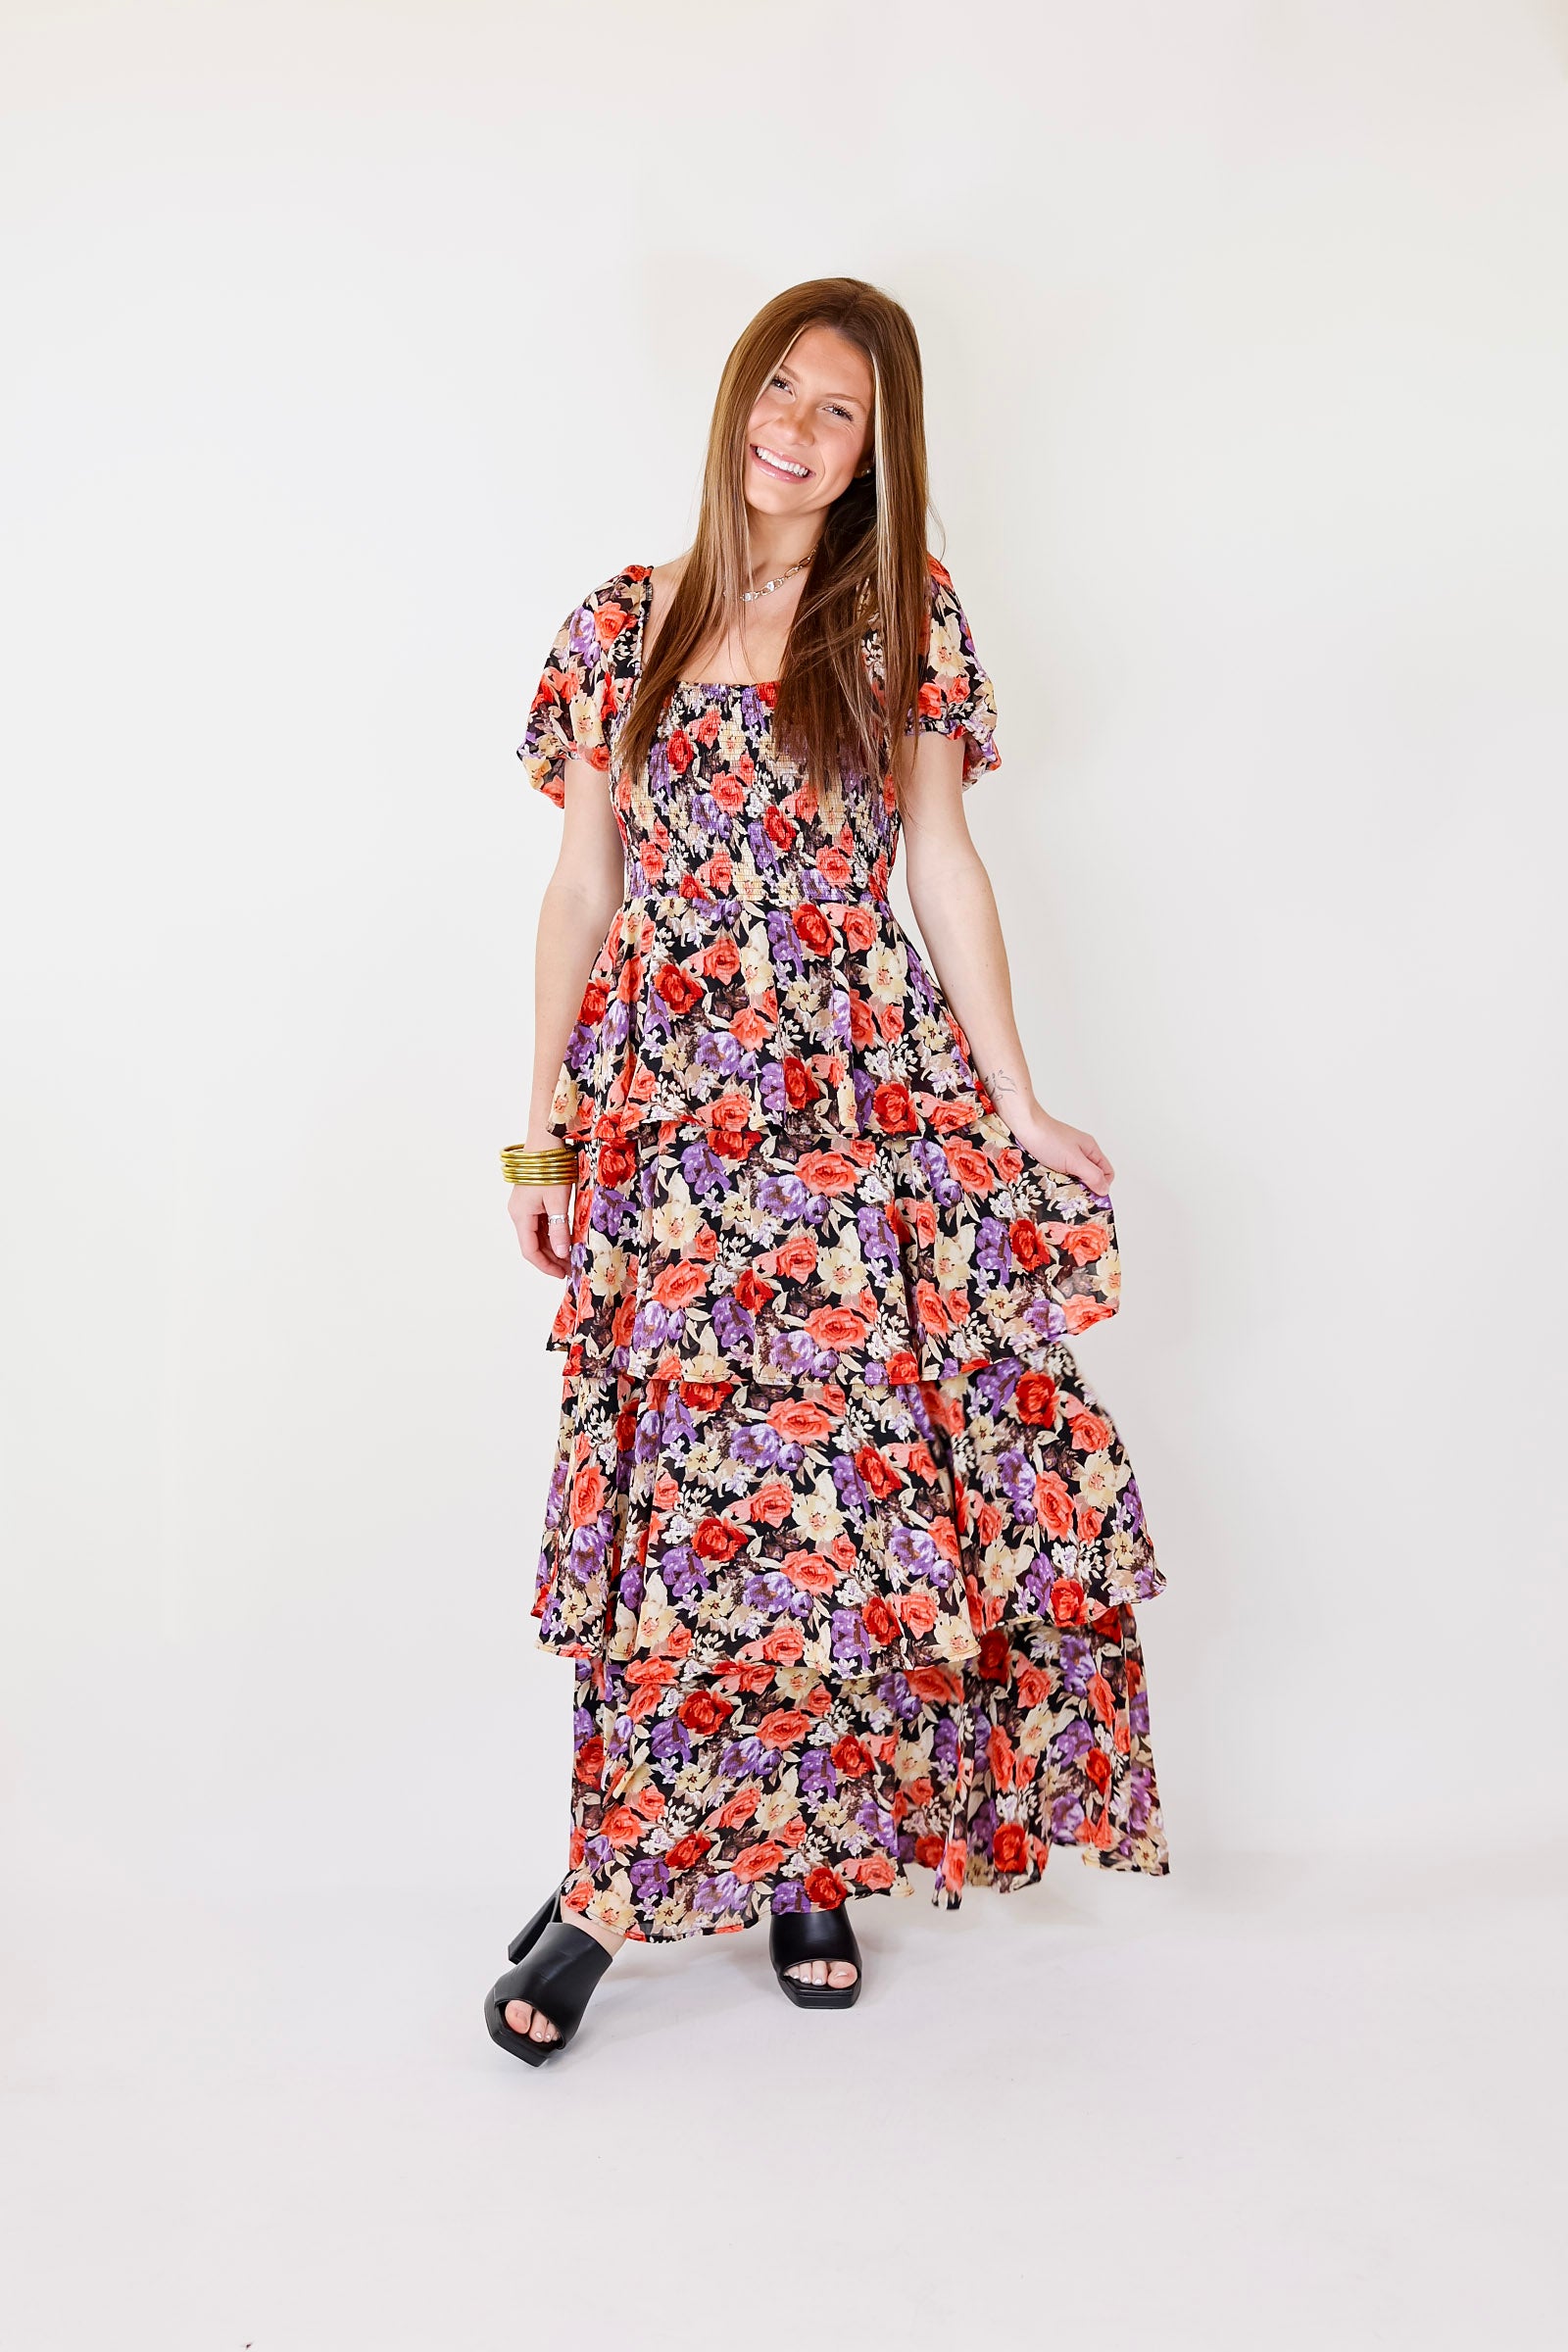 Fun Feeling Floral Tiered Maxi Dress with Smocked Balloon Sleeves in Pink Mix - Giddy Up Glamour Boutique